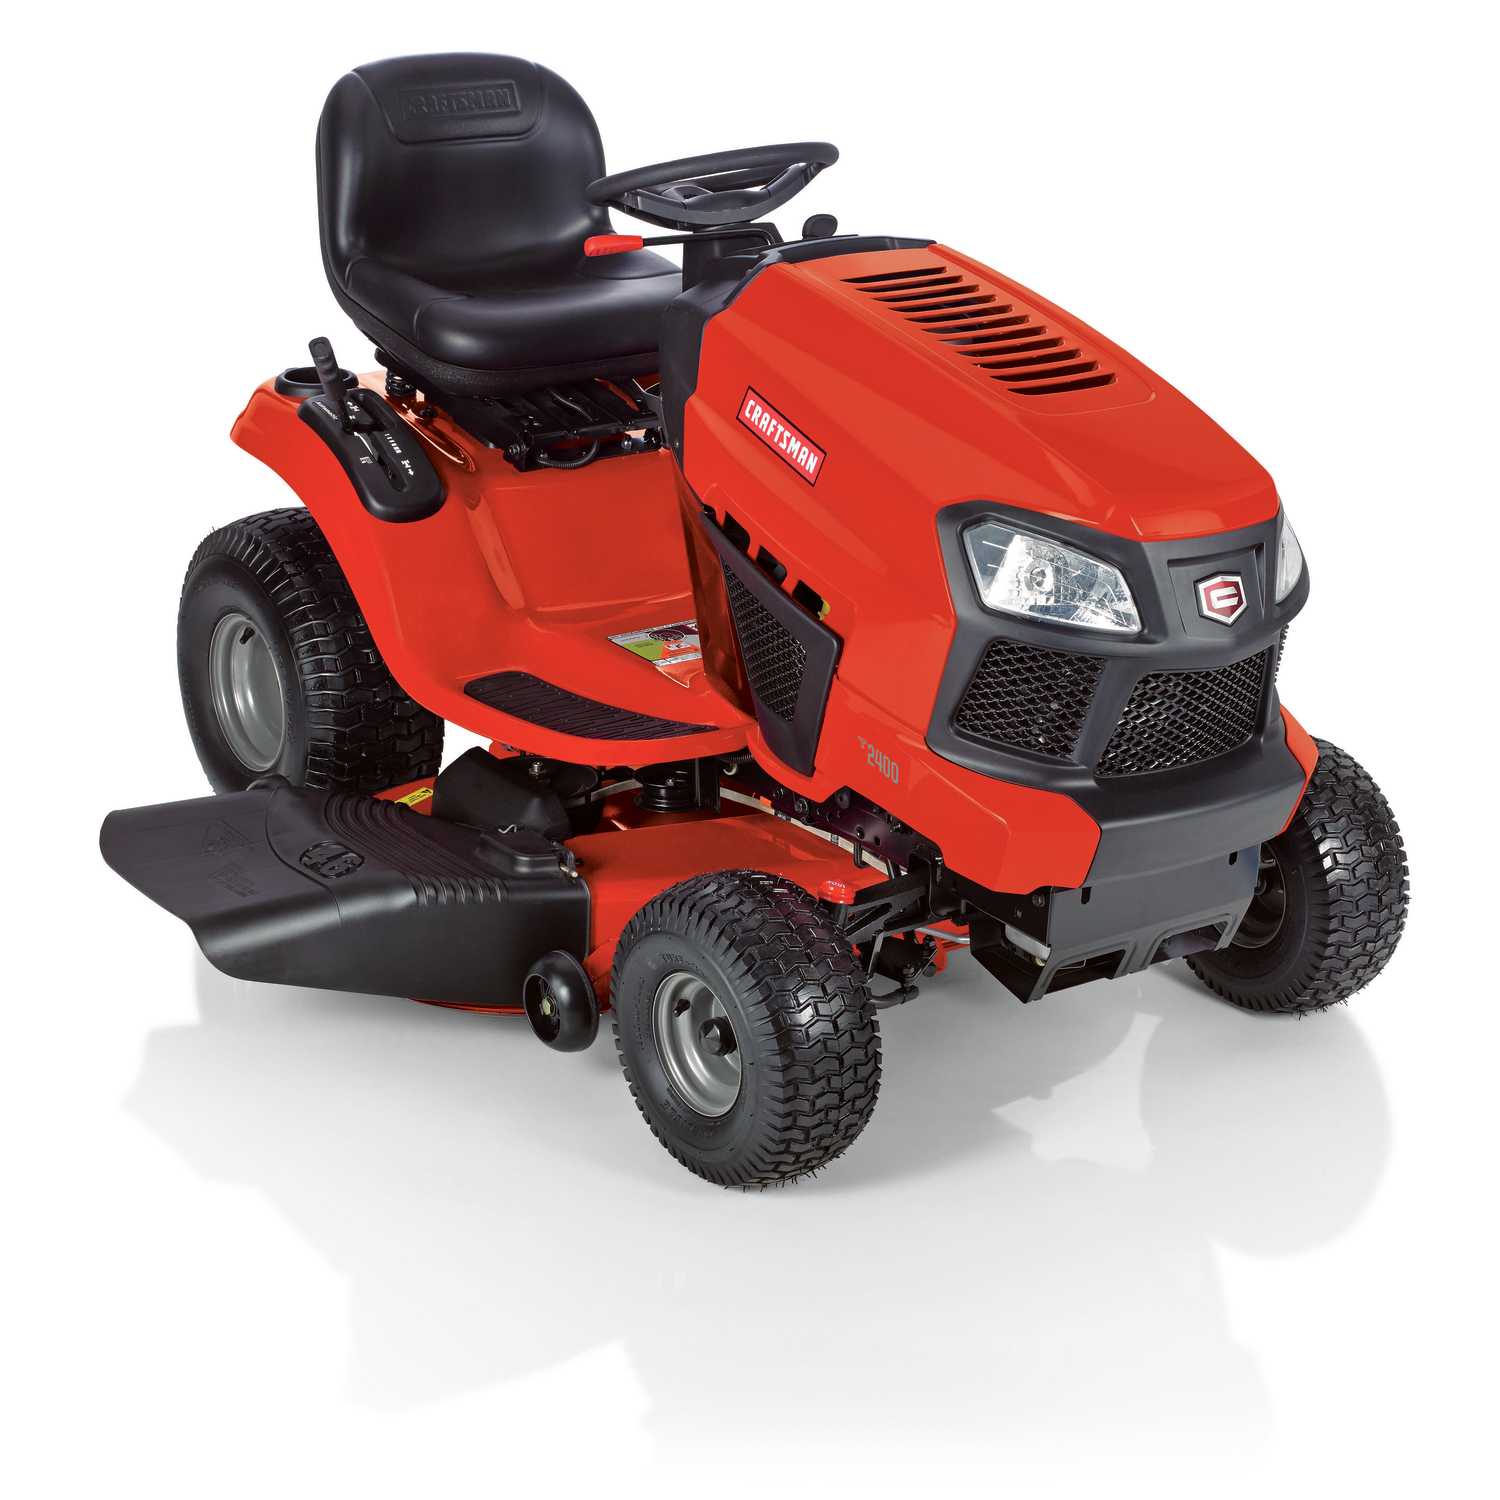 Outdoor Power and Lawn Equipment at Ace Hardware